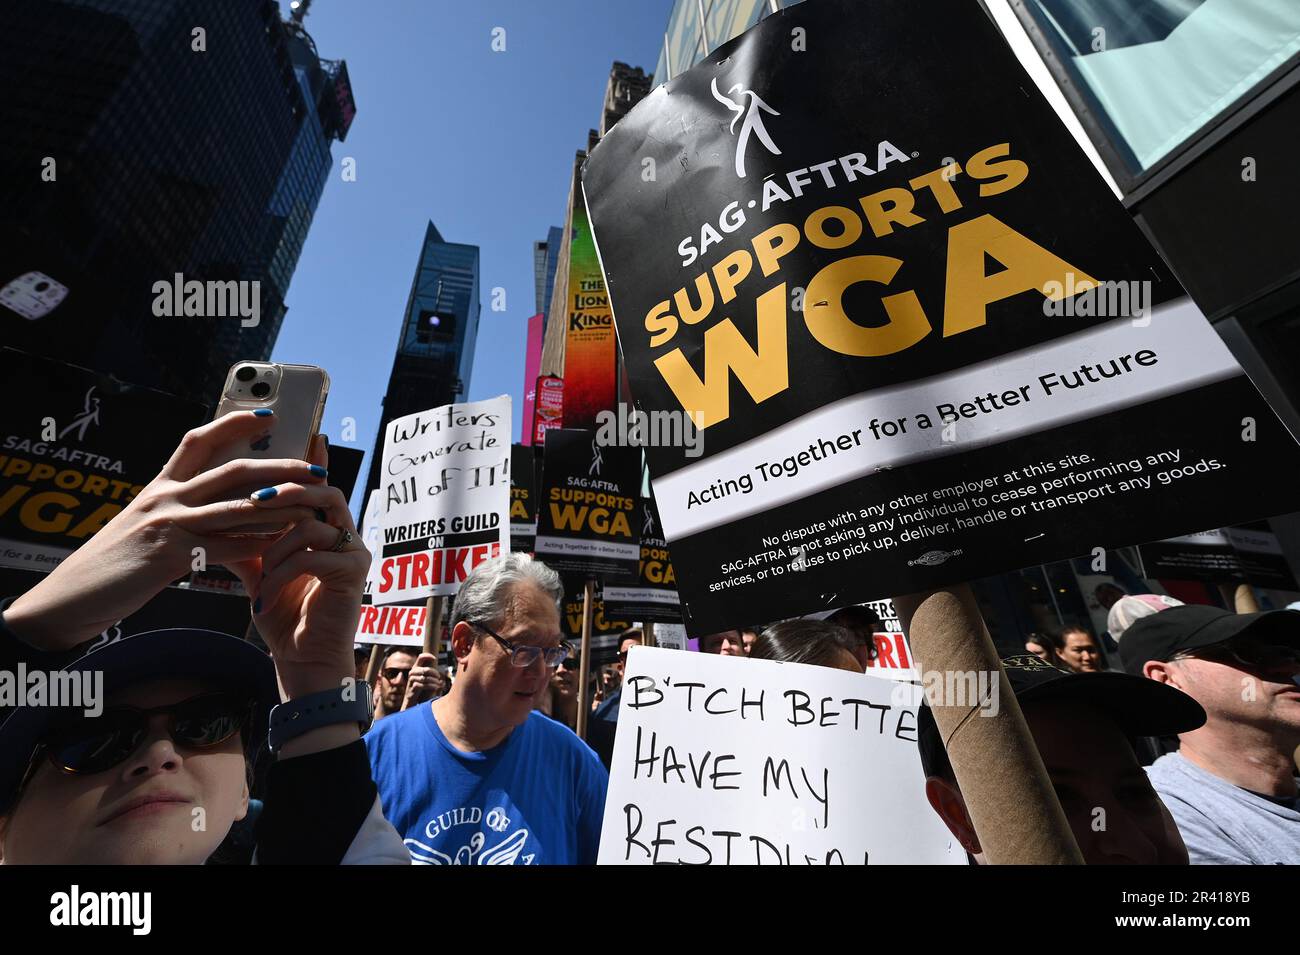 New York, USA. 25th May, 2023. Members of the Writers Guild of America (WGA) and their supporters hold an organized protest outside of Paramount offices in Times Square, New York, NY, May 25, 2023. The Writers Guild of America-East (WGA) is on strike against the Alliance of Motion Picture and Television Producers for better contract and residual rights. (Photo by Anthony Behar/Sipa USA) Credit: Sipa USA/Alamy Live News Stock Photo